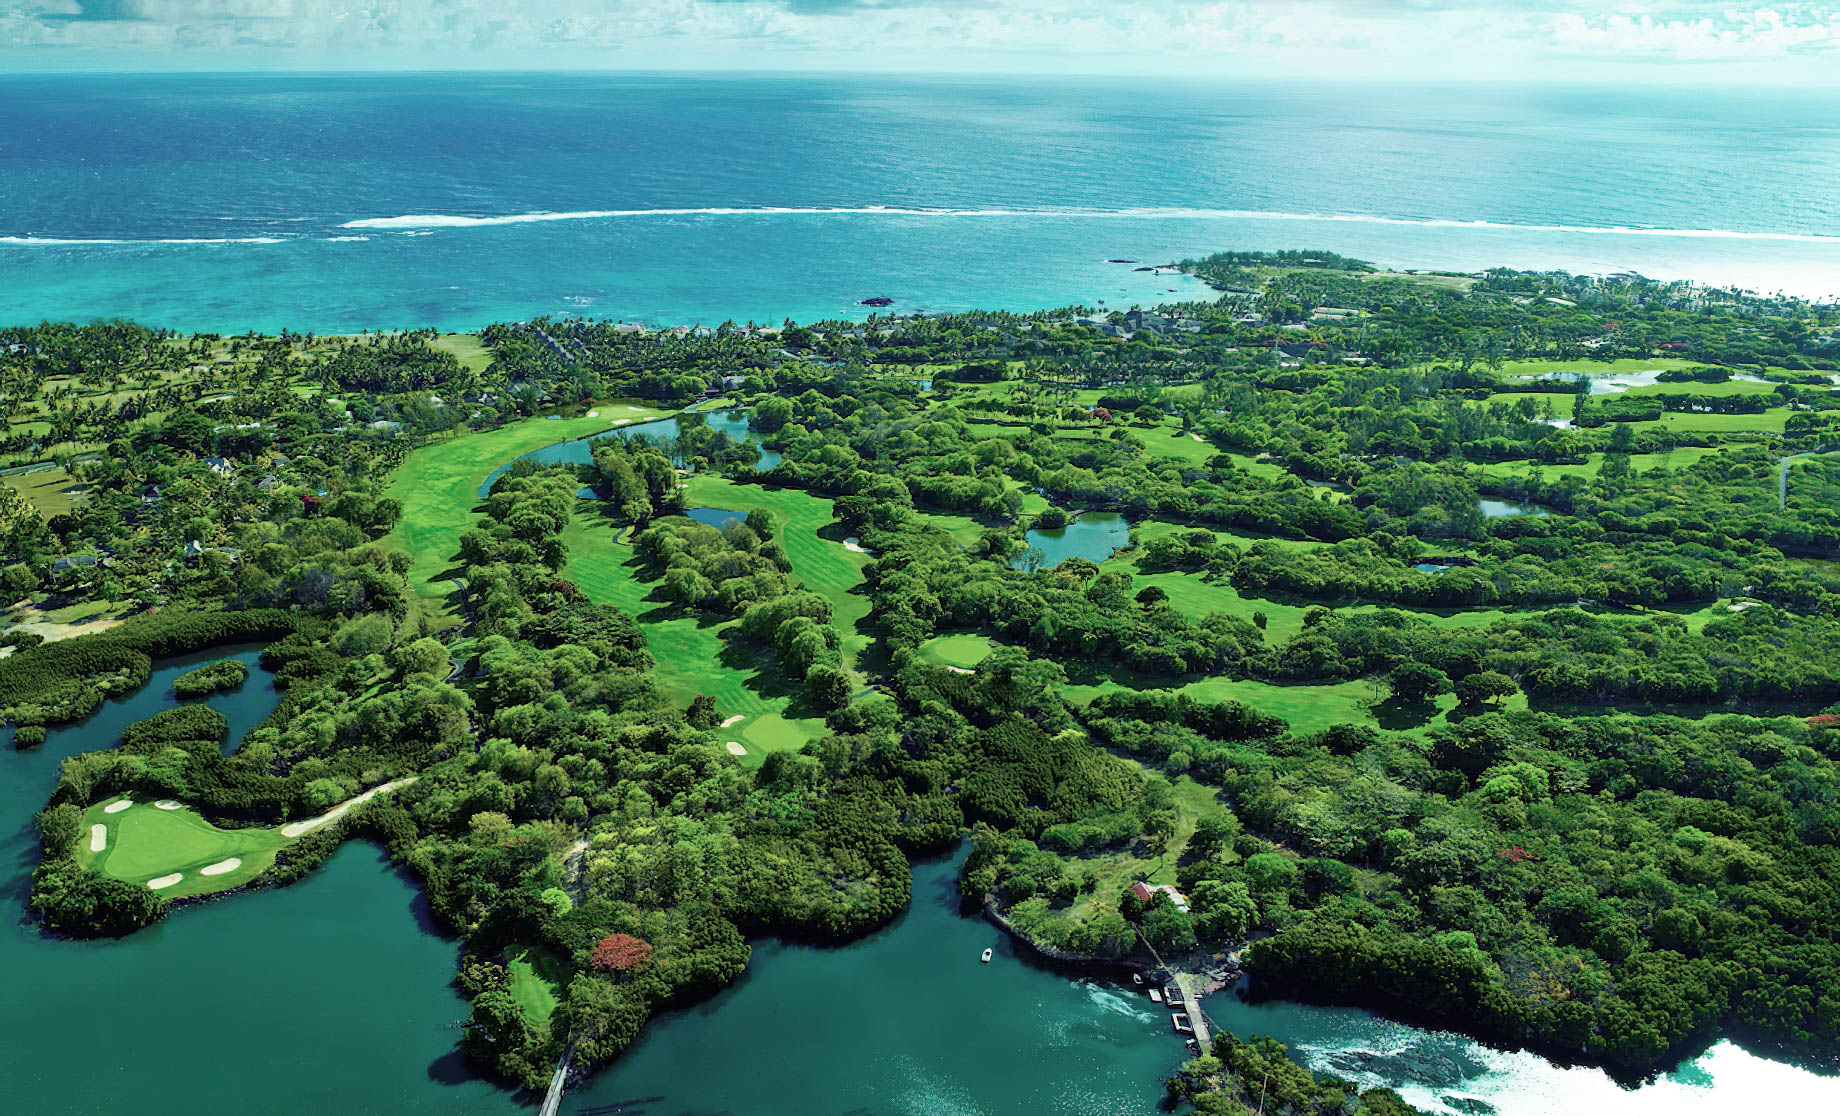 Constance Belle Mare Plage Resort – Mauritius – Golf Course Aerial View